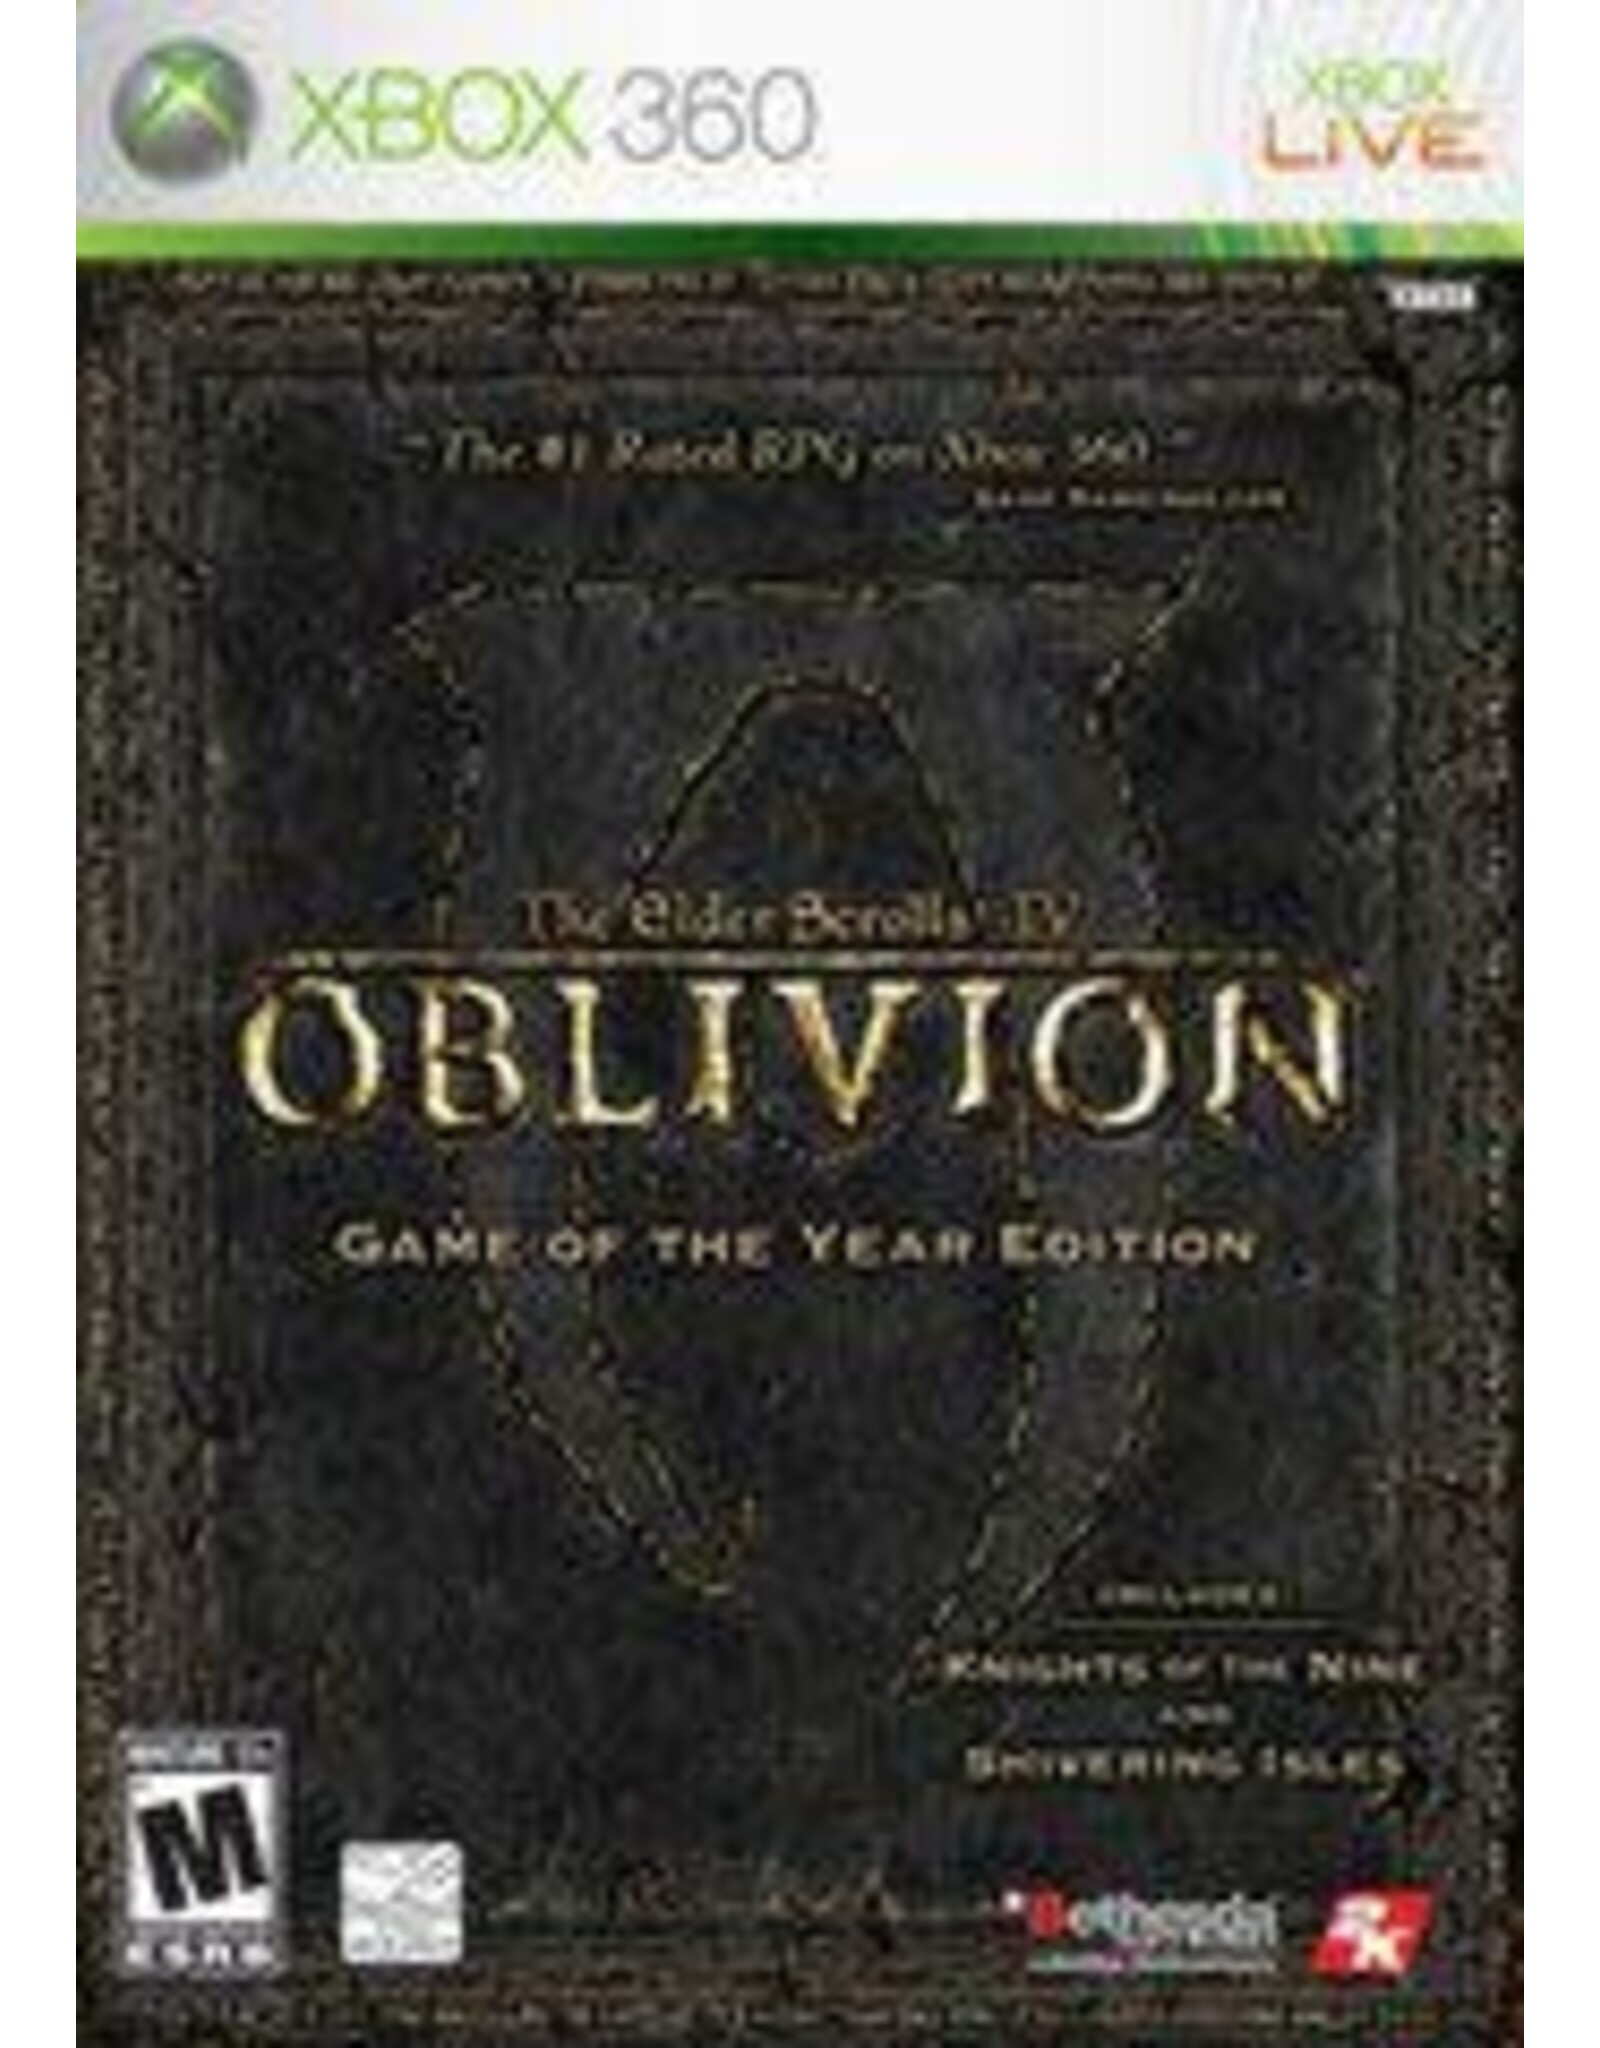 Xbox 360 Oblivion Game of the Year, Elder Scrolls IV (Used)